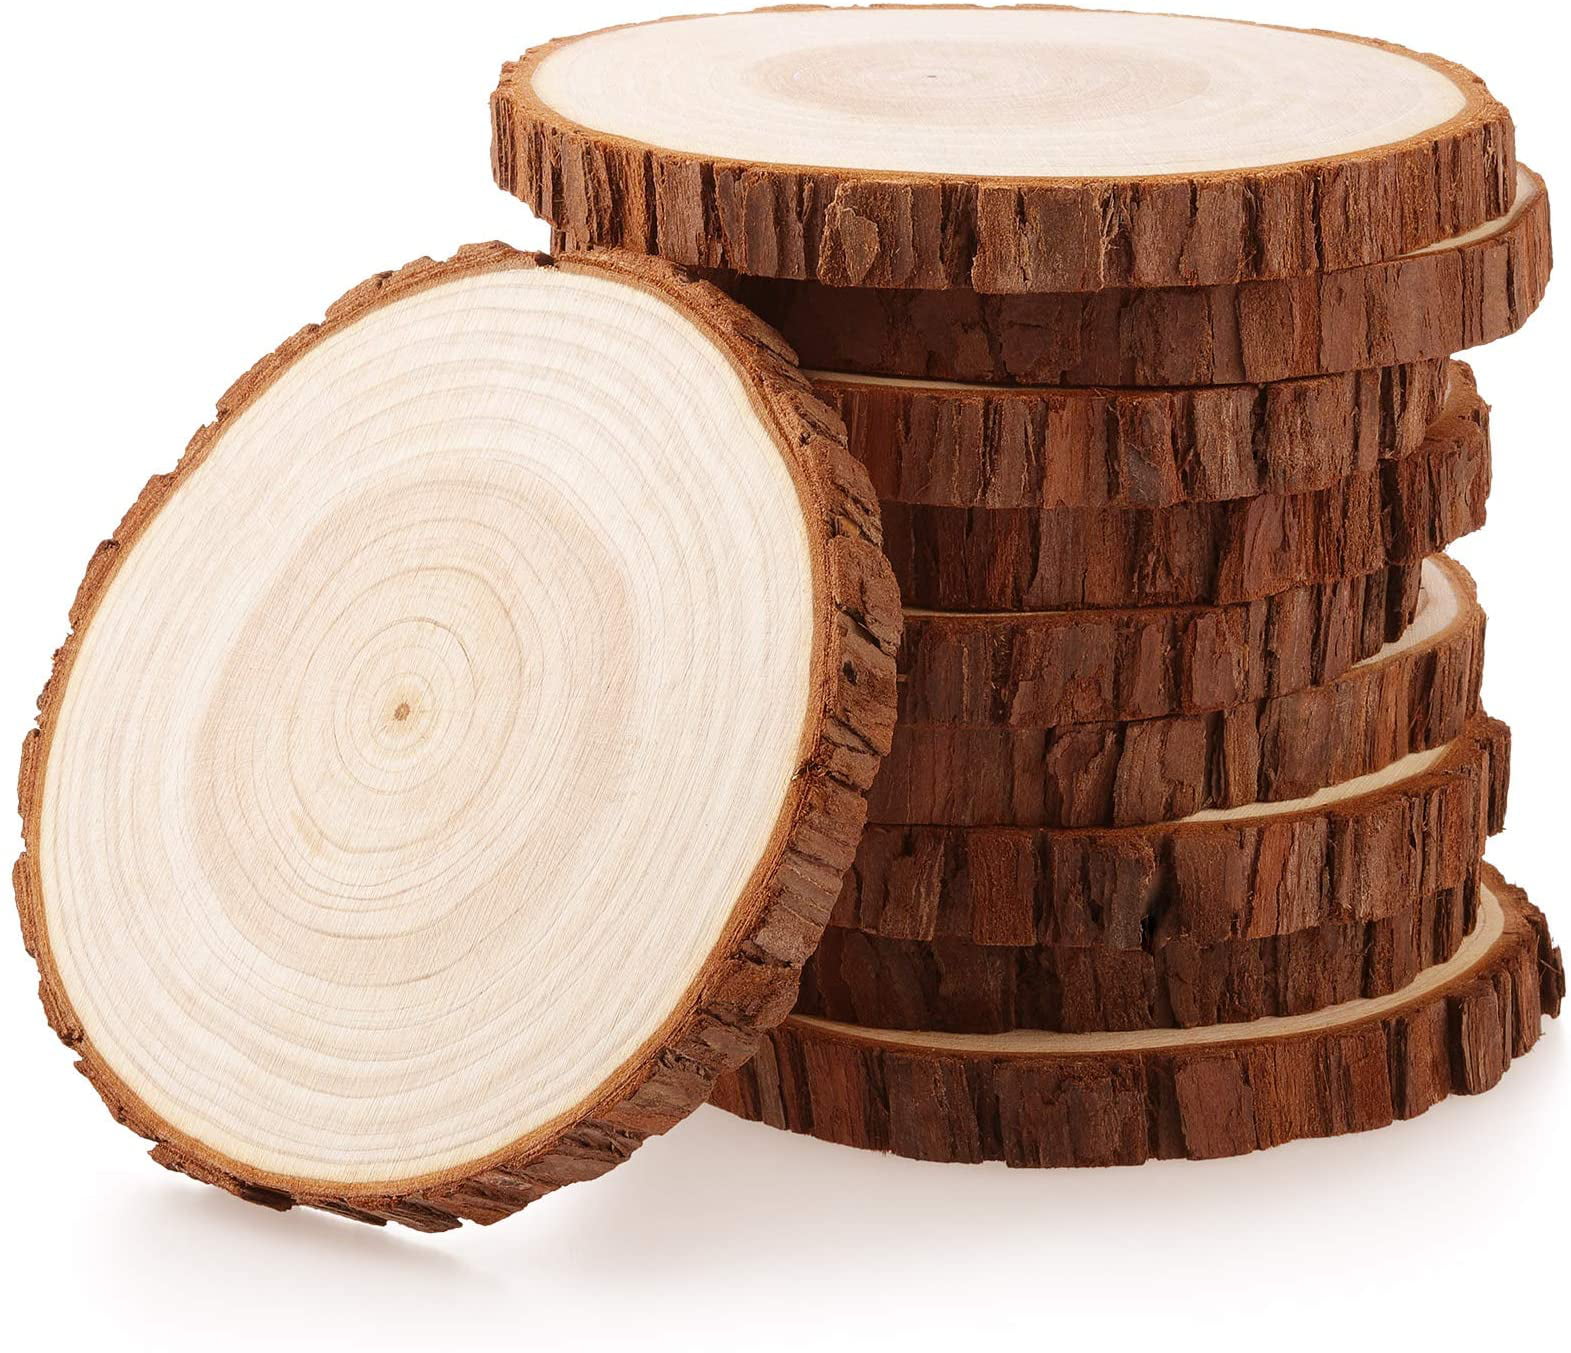 20 PCS Wood Log Slices Discs For DIY Crafts Party Wedding Table Decorations